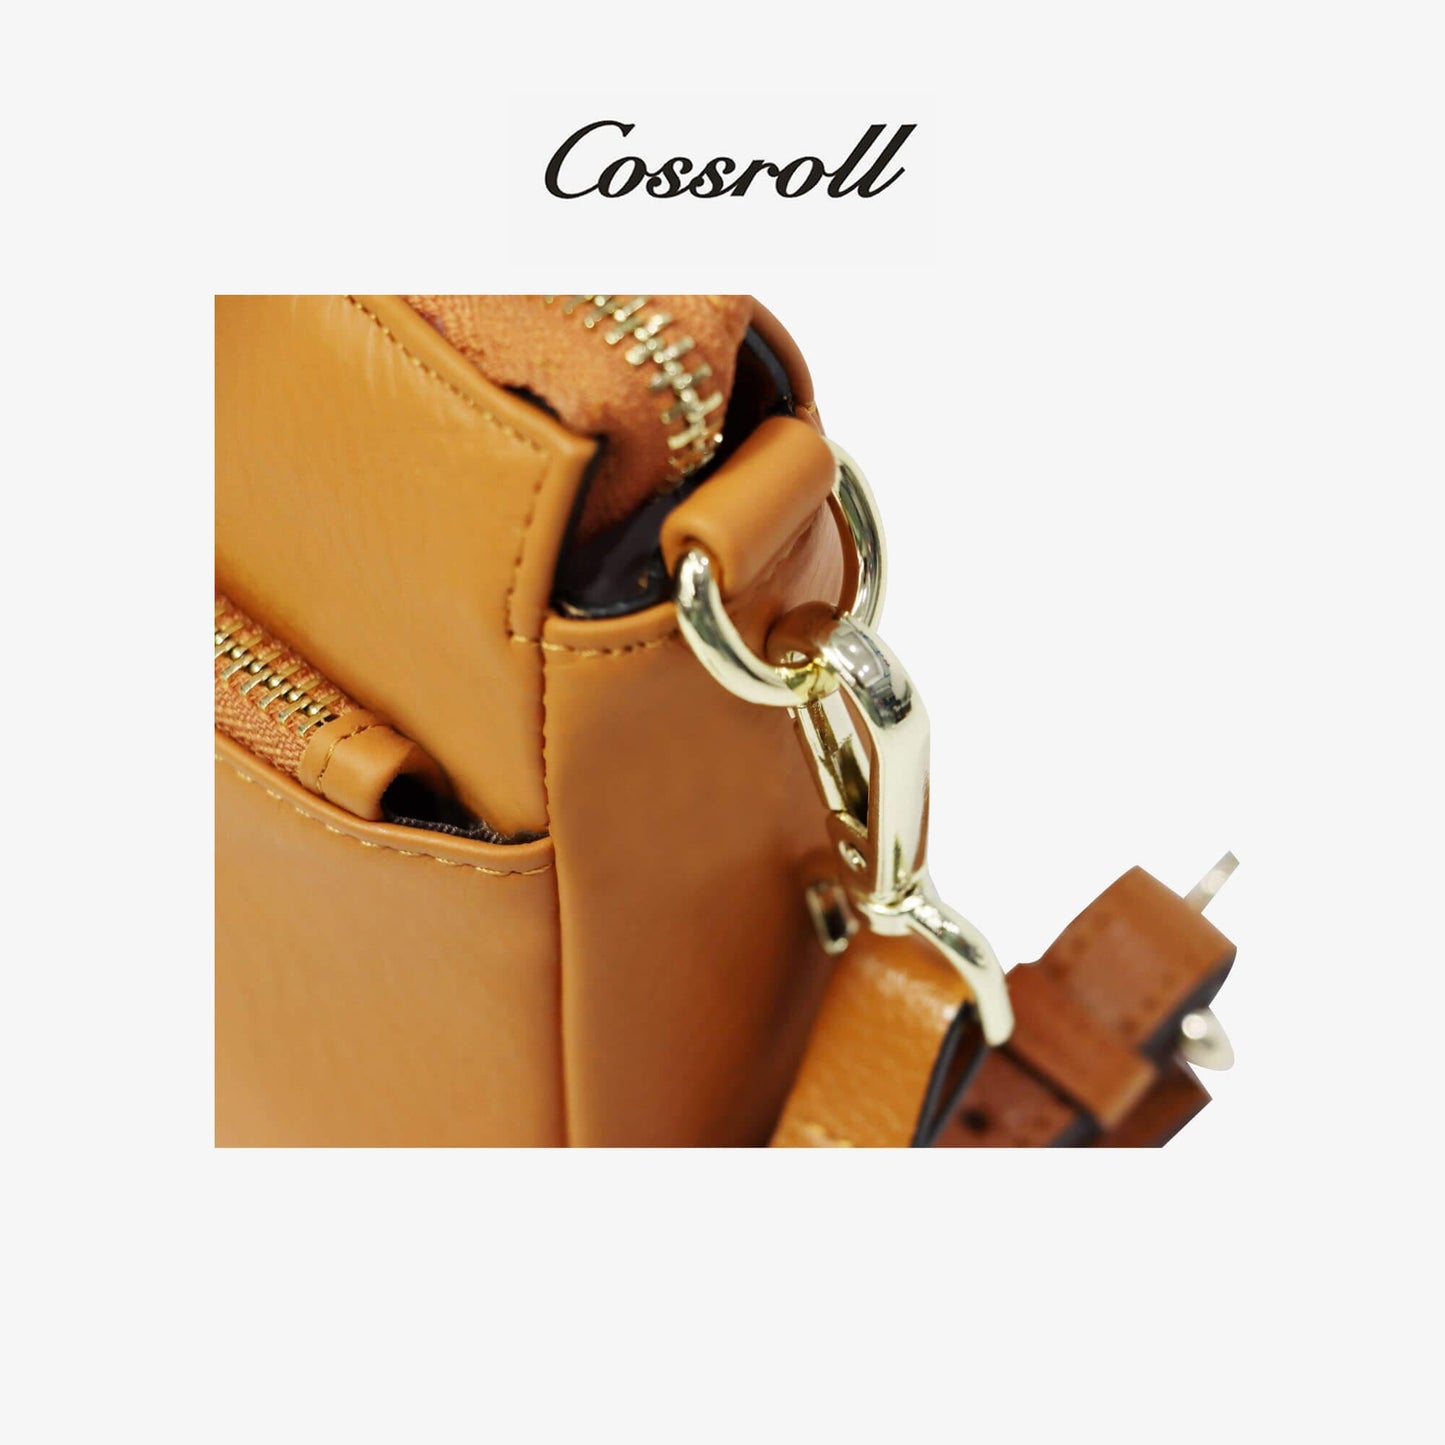 Leather Messenger Bag Crossbody For Wholesale - cossroll.leather